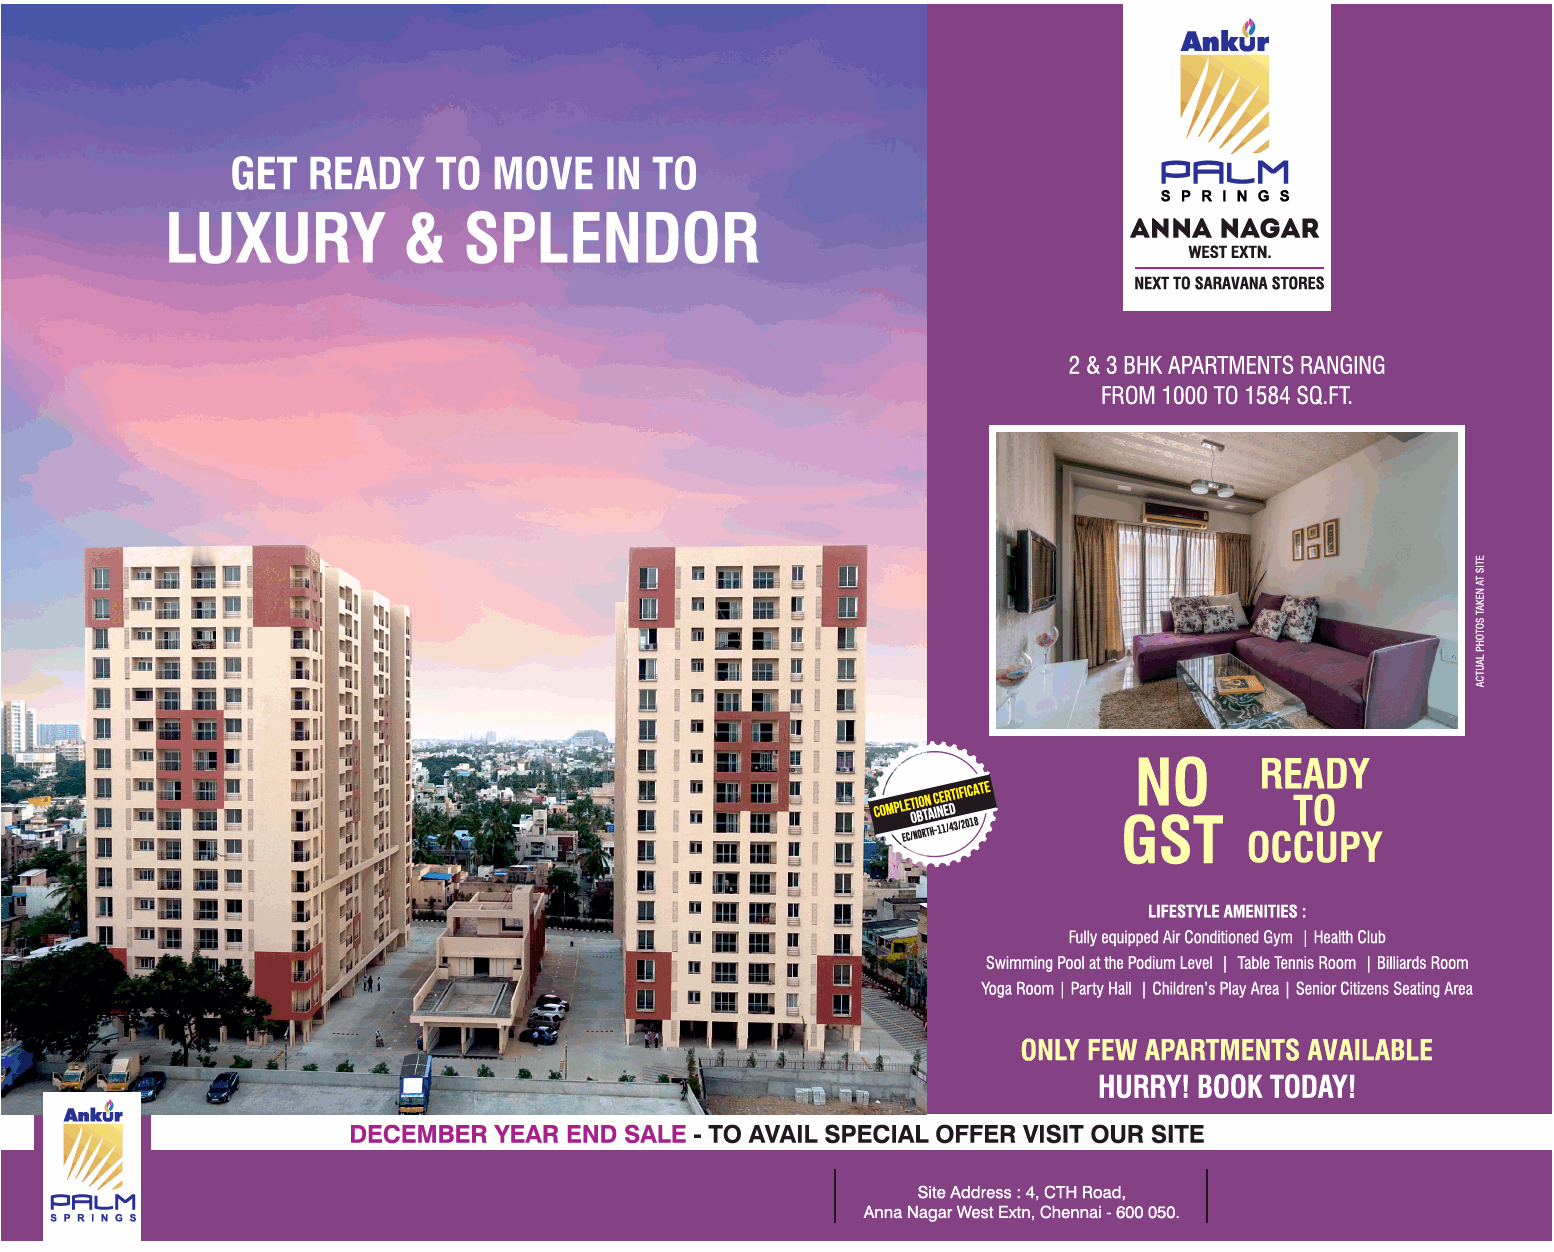 Get ready to move in to luxury & splendor at Ankur Palm Springs, Chennai